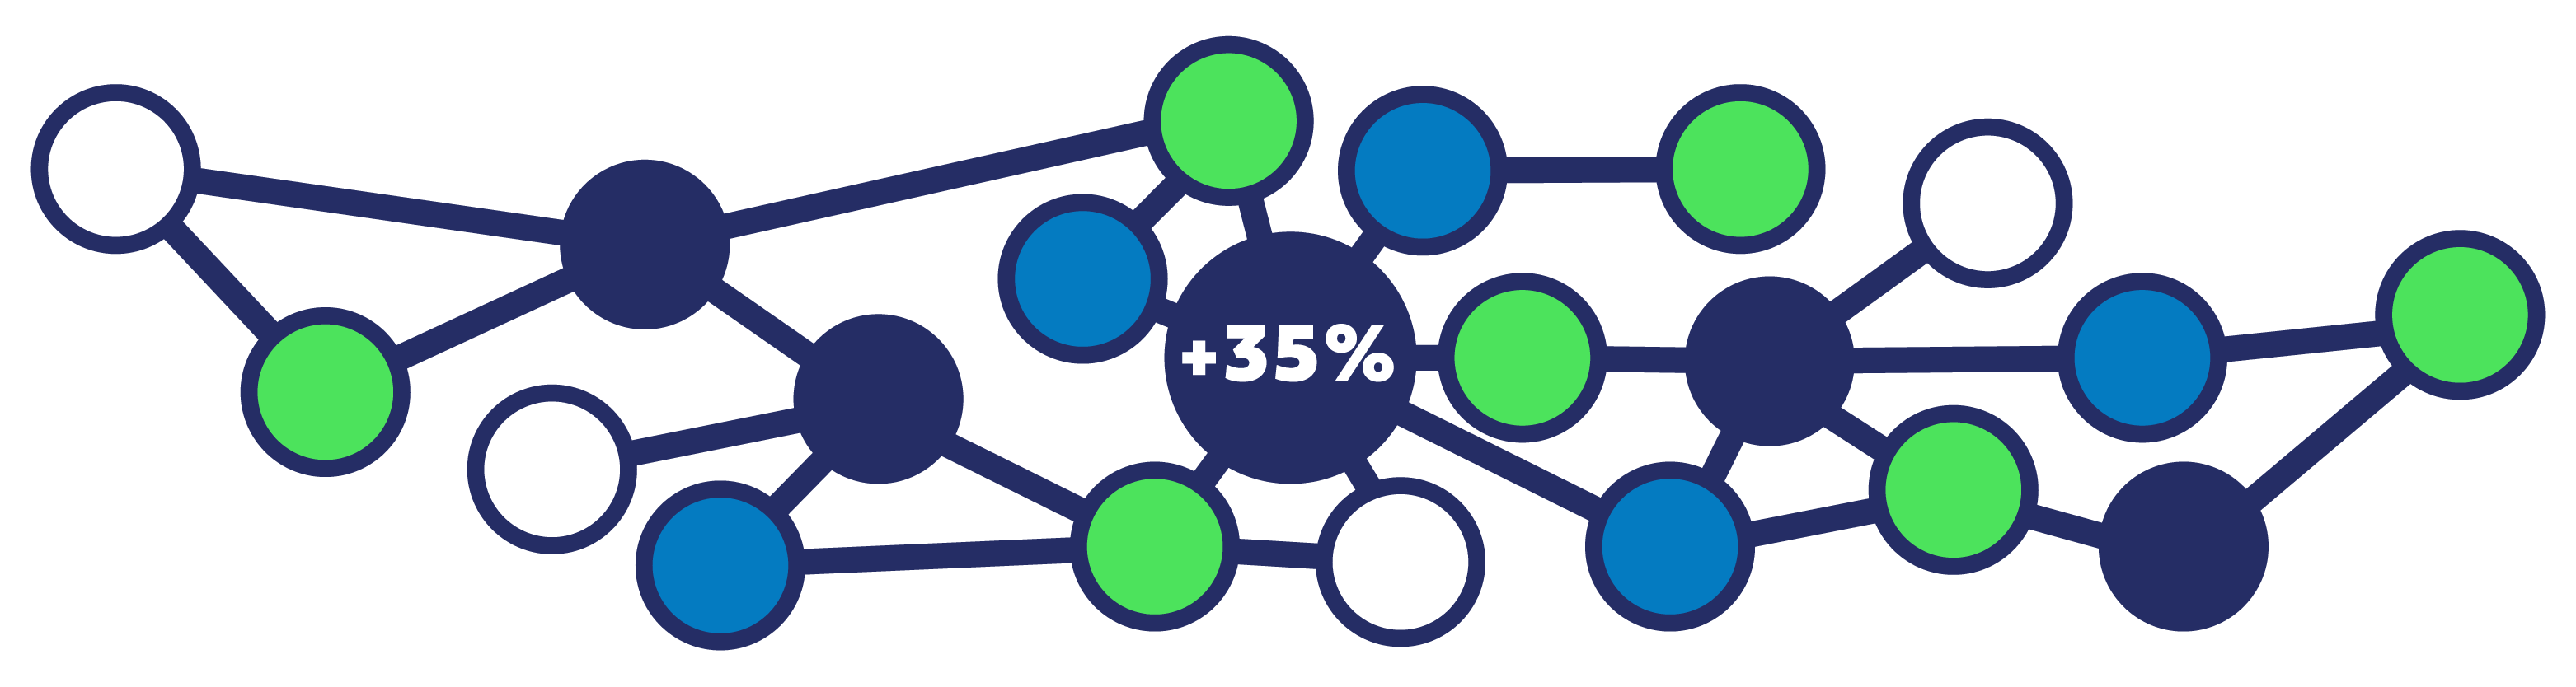 A series of outlined circles in green and blue with a large circle in the center displaying +35%.